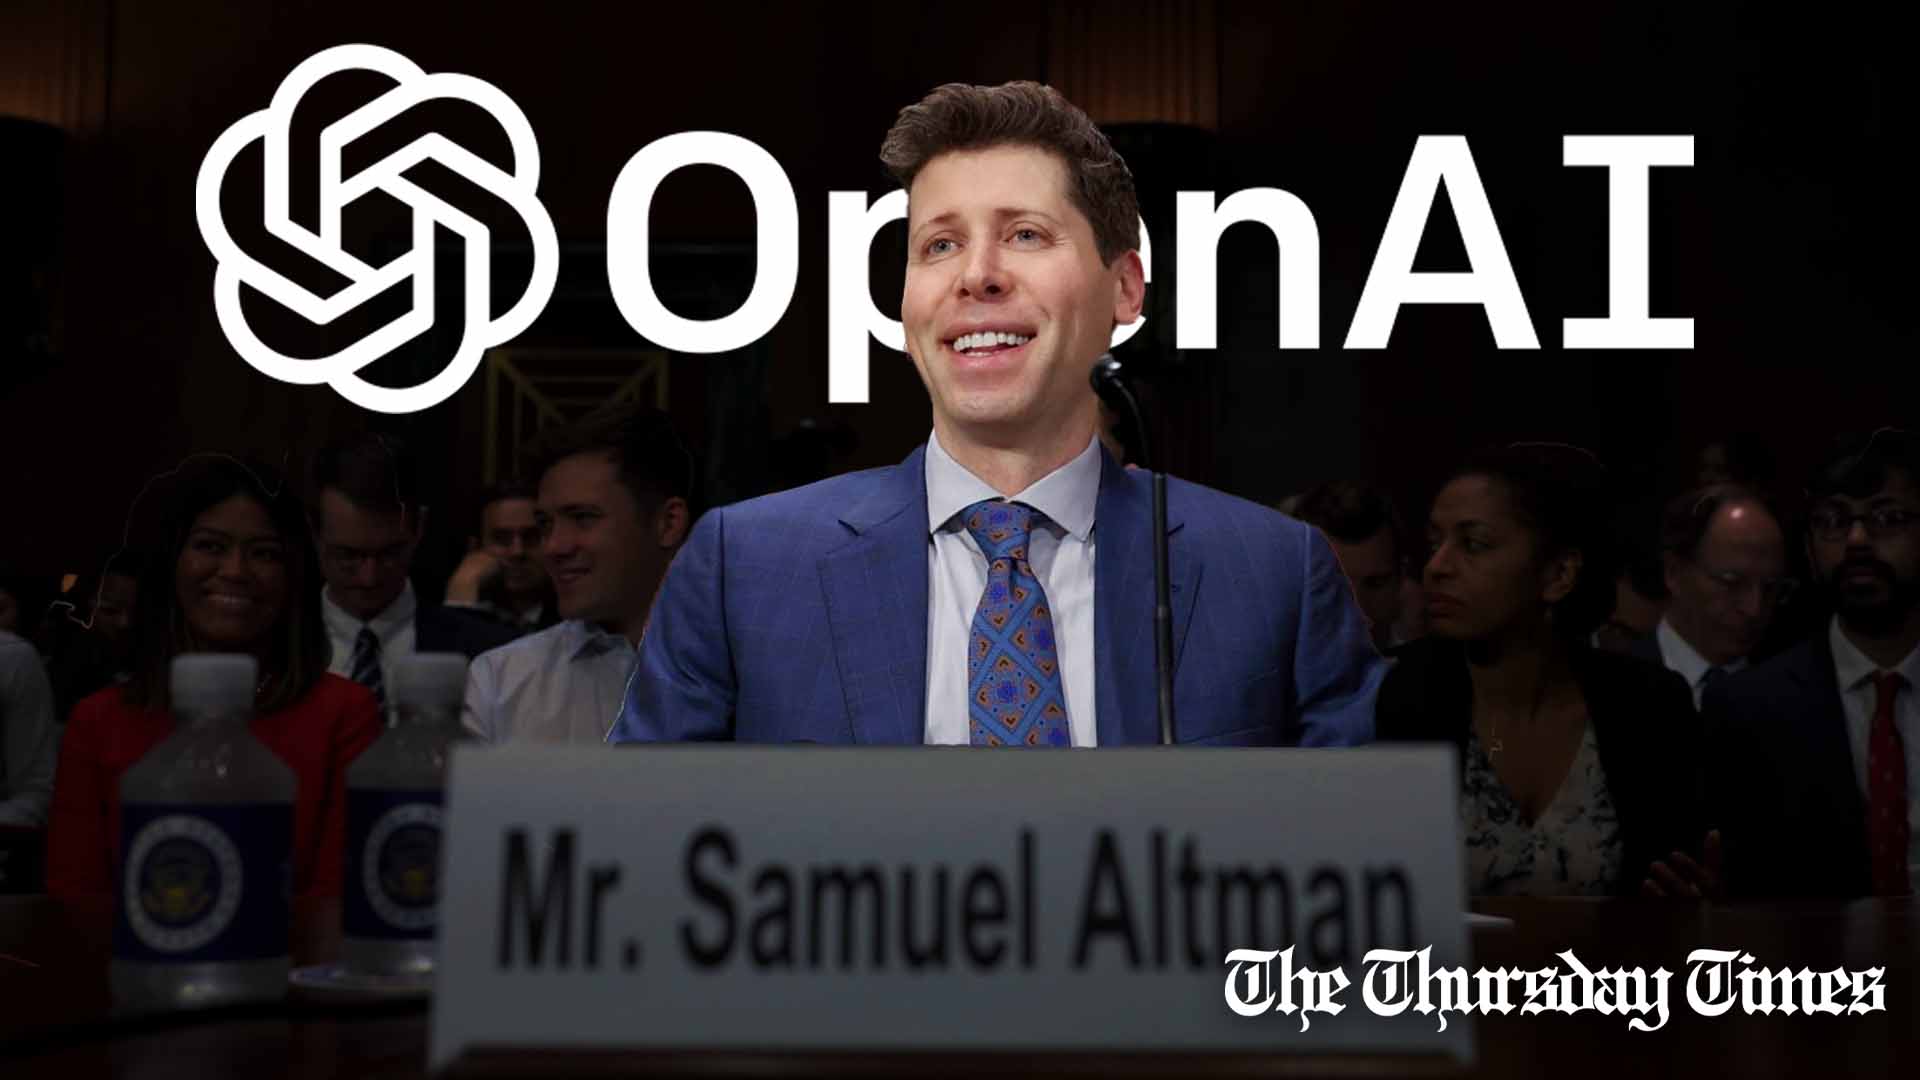 A file photo is shown of former OpenAI CEO, Sam Altman, testifying before a U.S. Senate subcommittee at Washington, D.C. on May 16, 2023. — GETTY/THE THURSDAY TIMES